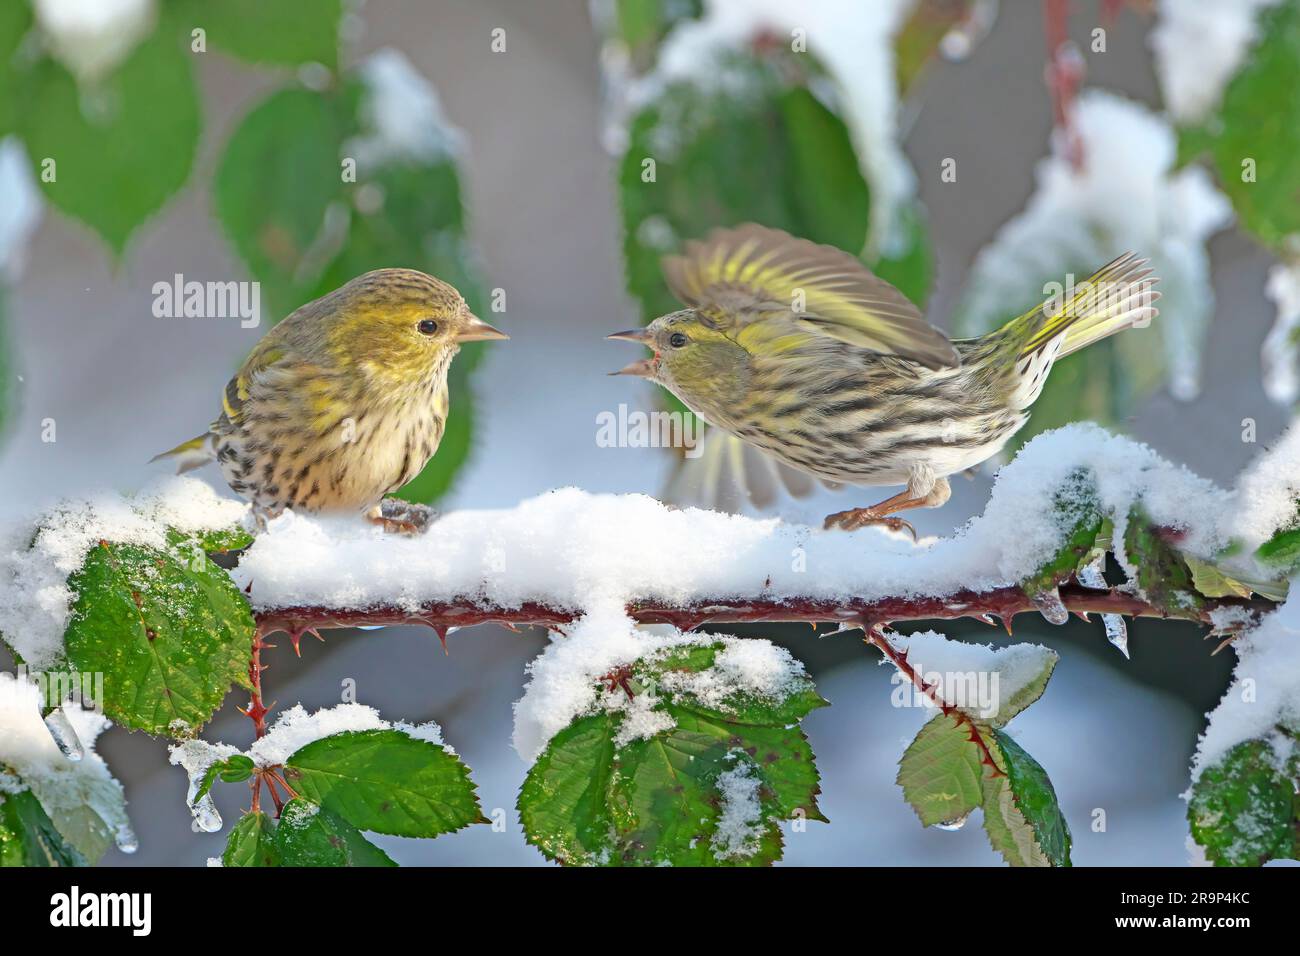 Eurasian Siskin (Carduelis spinus). Adult female perched on a snowy Bramble twig. One threatens the other, Germany Stock Photo